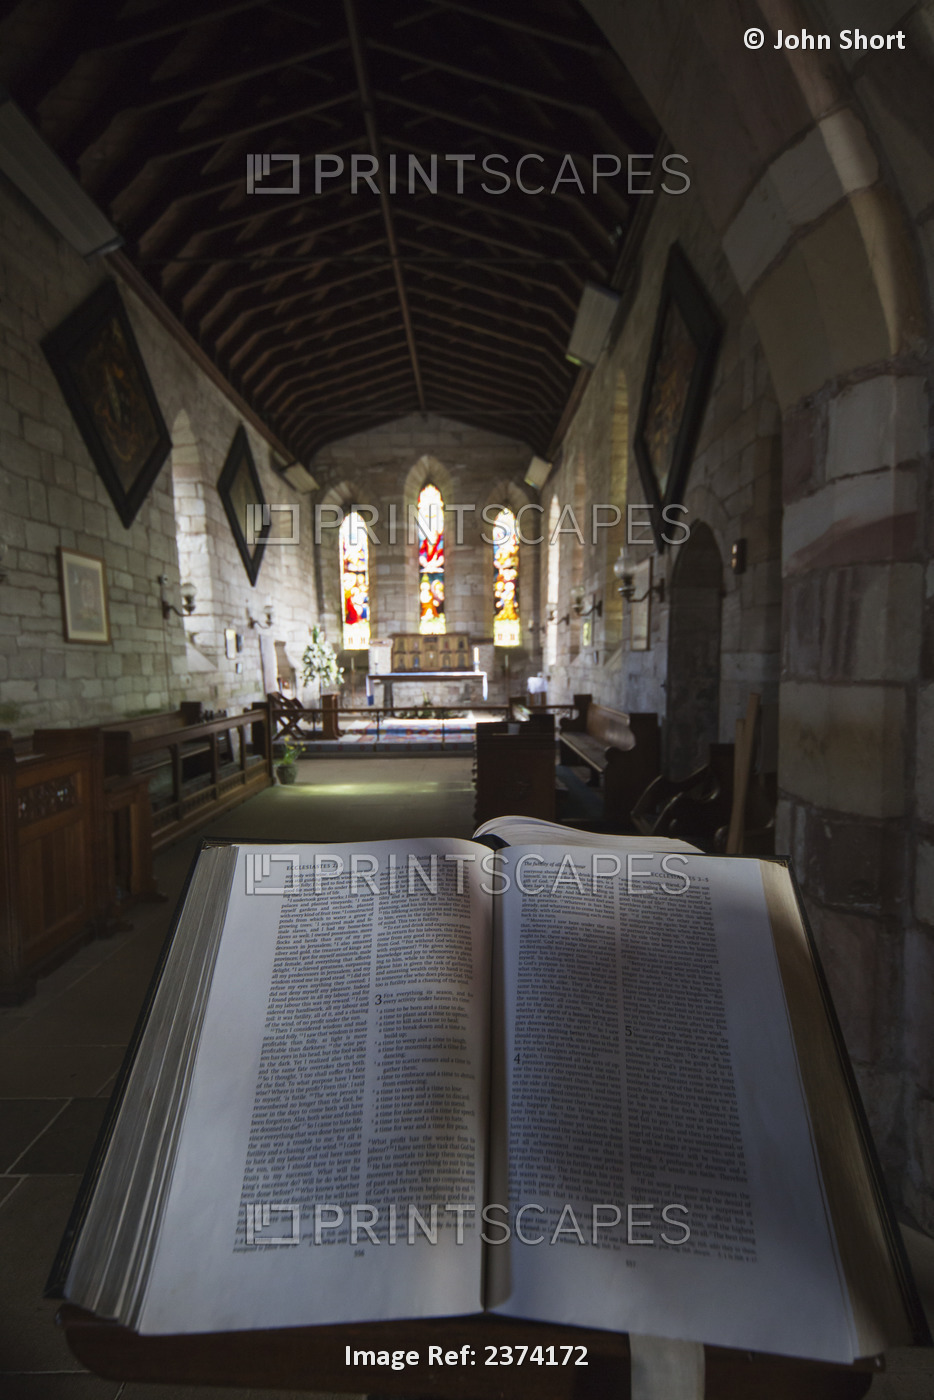 View Of The Interior Of A Church With Stained Glass Windows And An Open Bible; ...